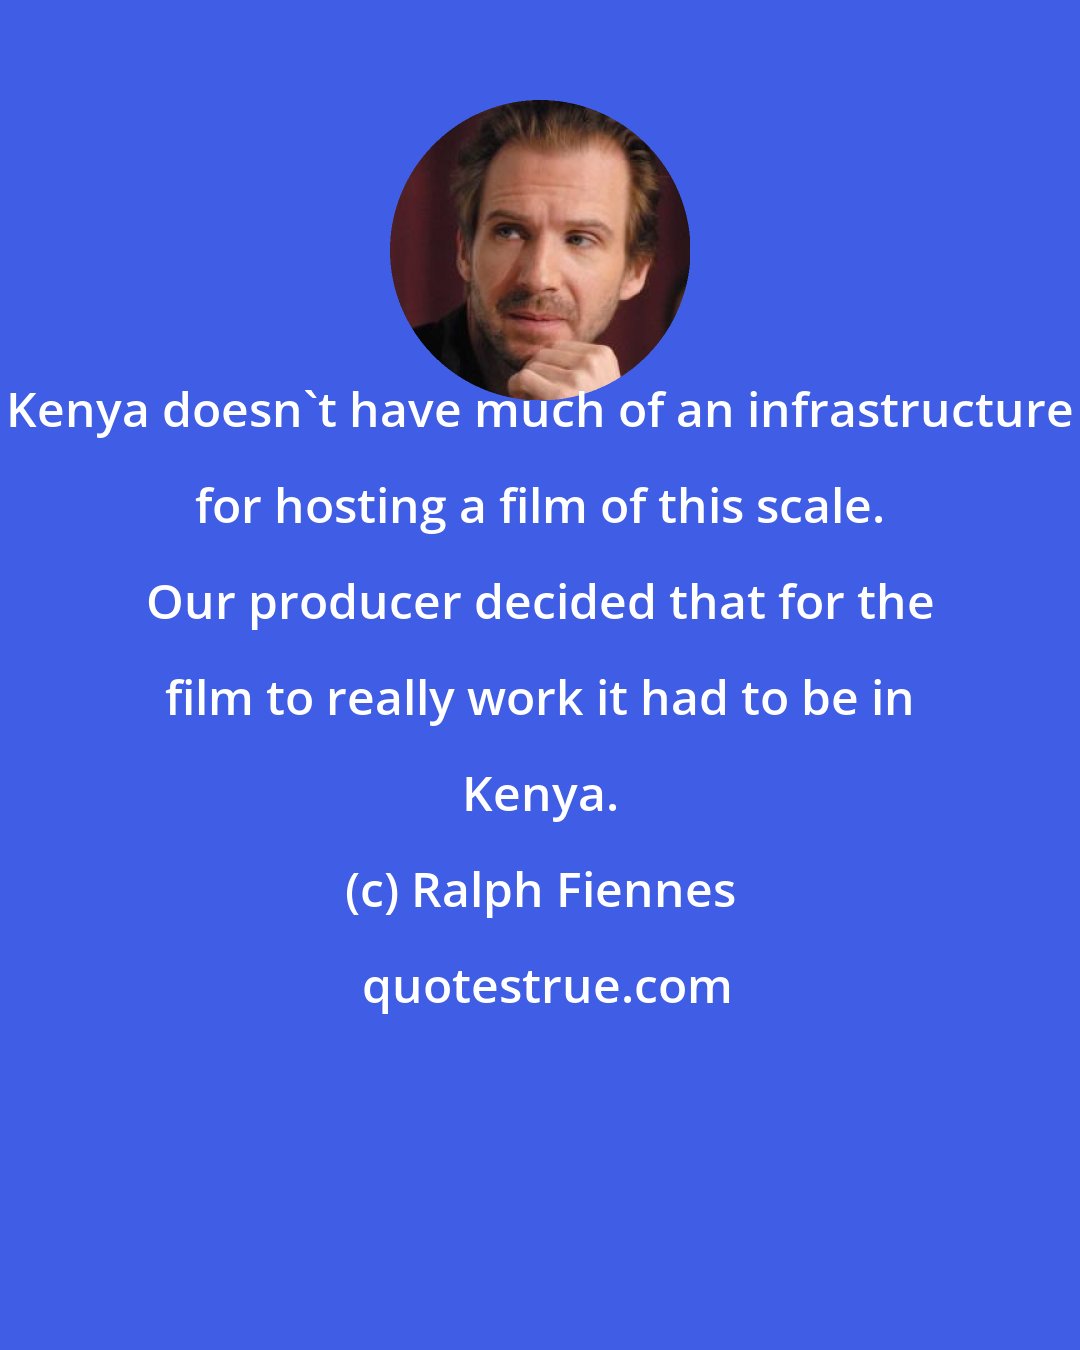 Ralph Fiennes: Kenya doesn't have much of an infrastructure for hosting a film of this scale. Our producer decided that for the film to really work it had to be in Kenya.